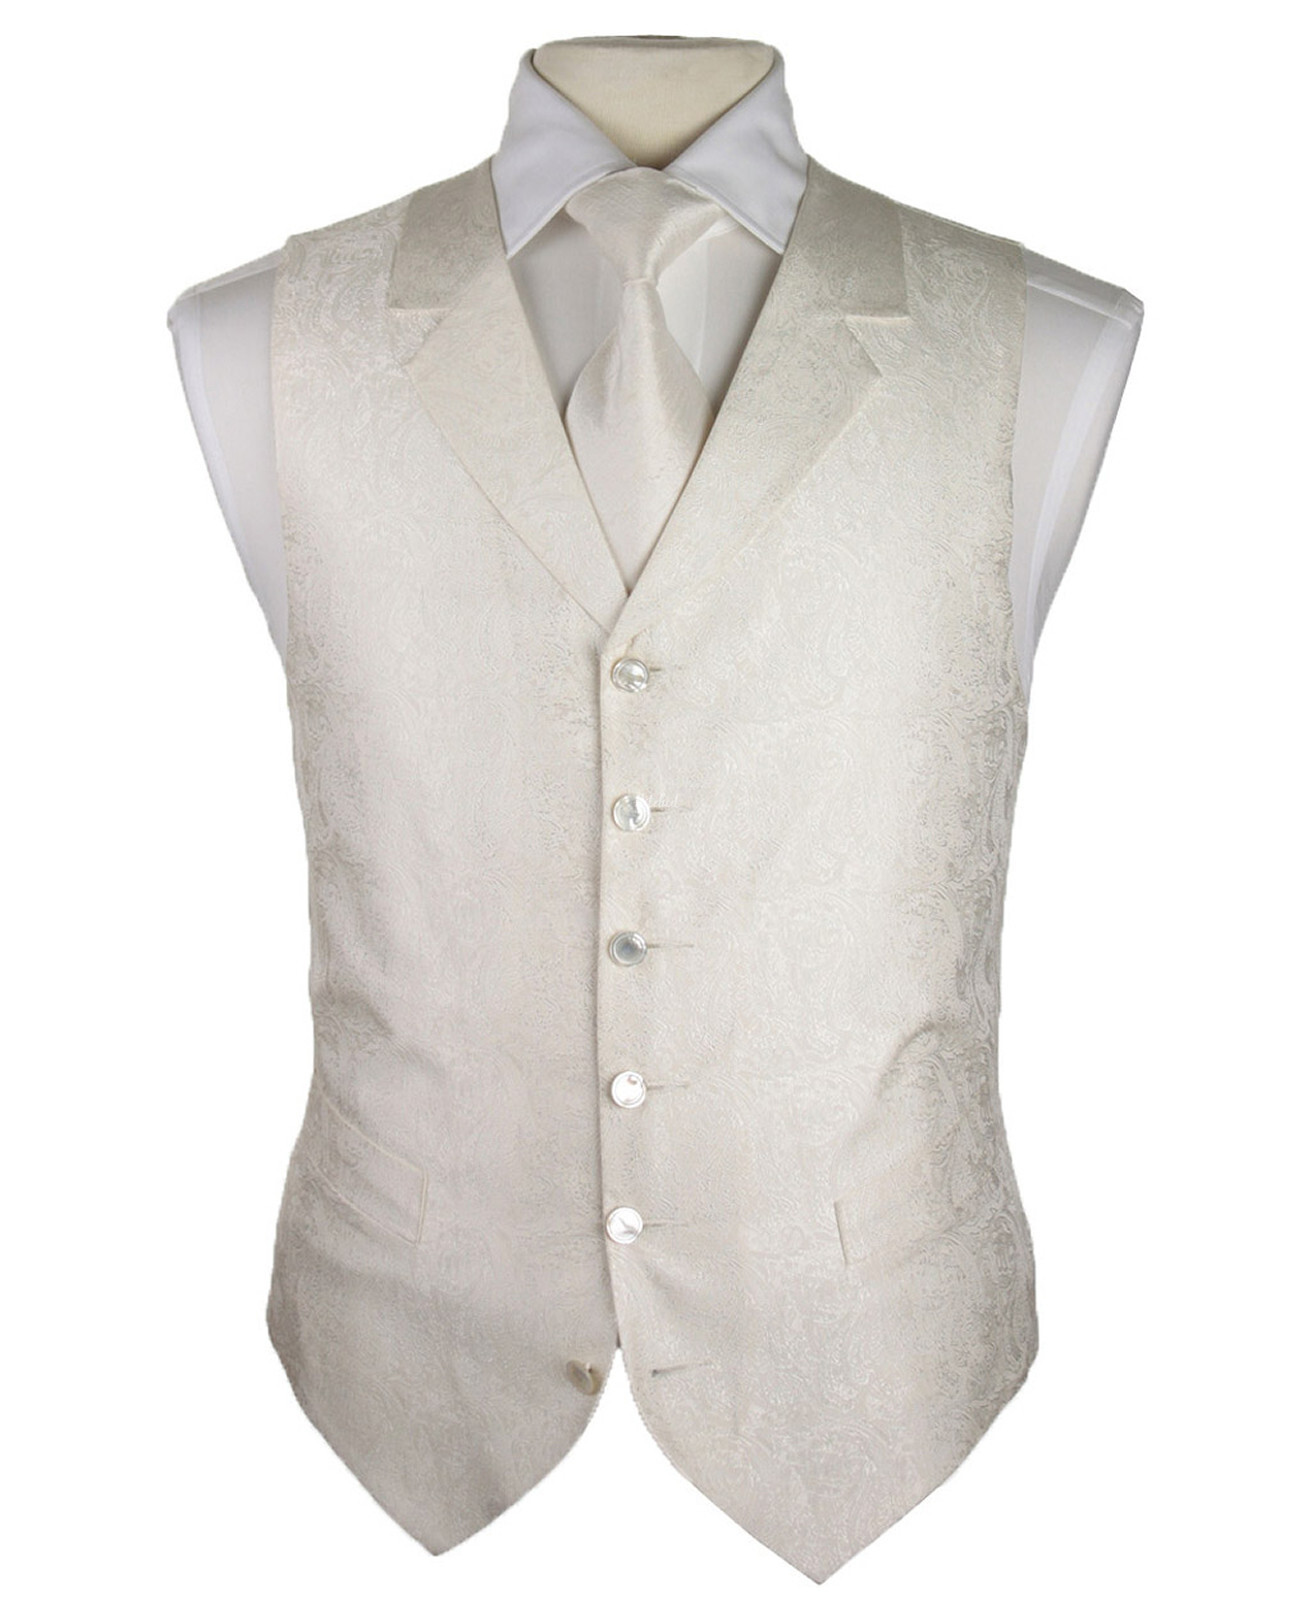 6-button White Paisley (FBM2) Mens Wedding Suit from Favourbrook ...